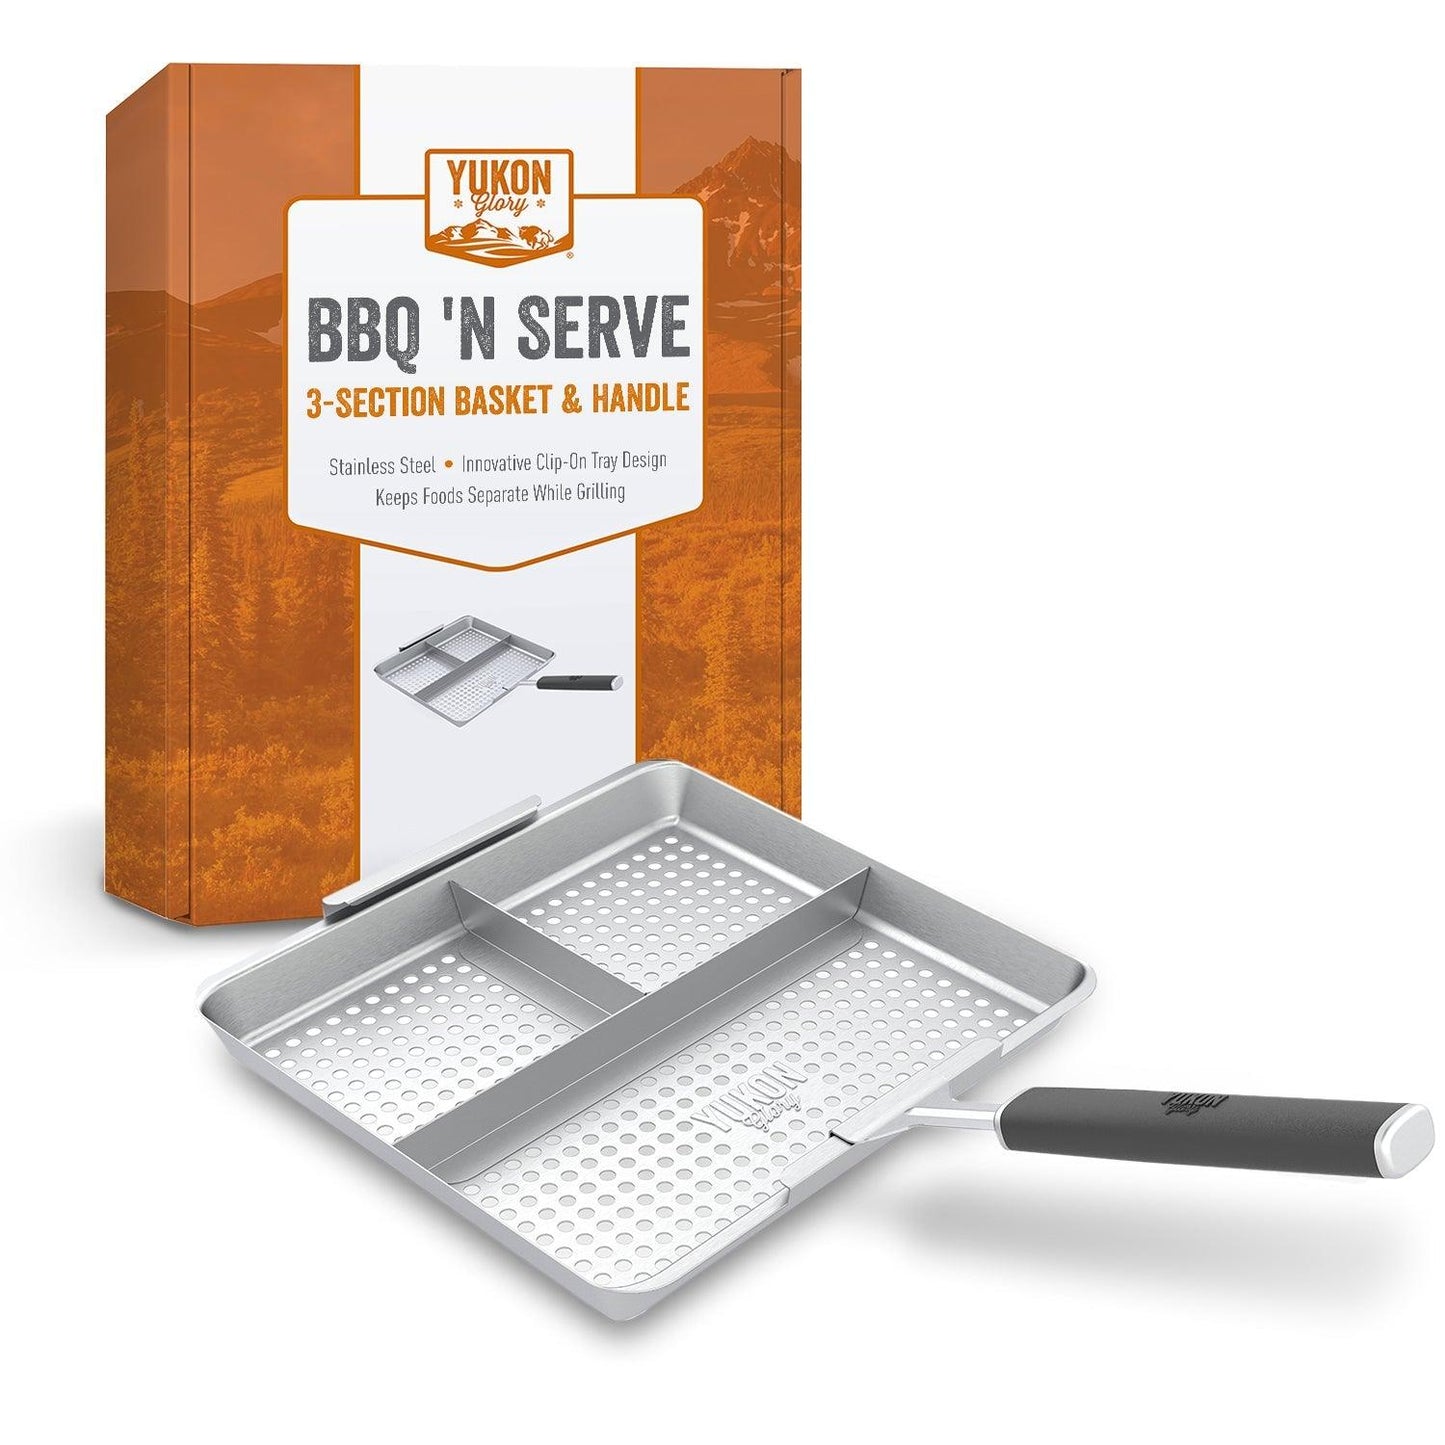 Yukon Glory Grill 'N Serve 3 Section BBQ Grill Basket The Grilling Basket Includes a Clip-On Handle - Perfect Grill Baskets for Outdoor Grill Vegetables or Fish Basket & Meat